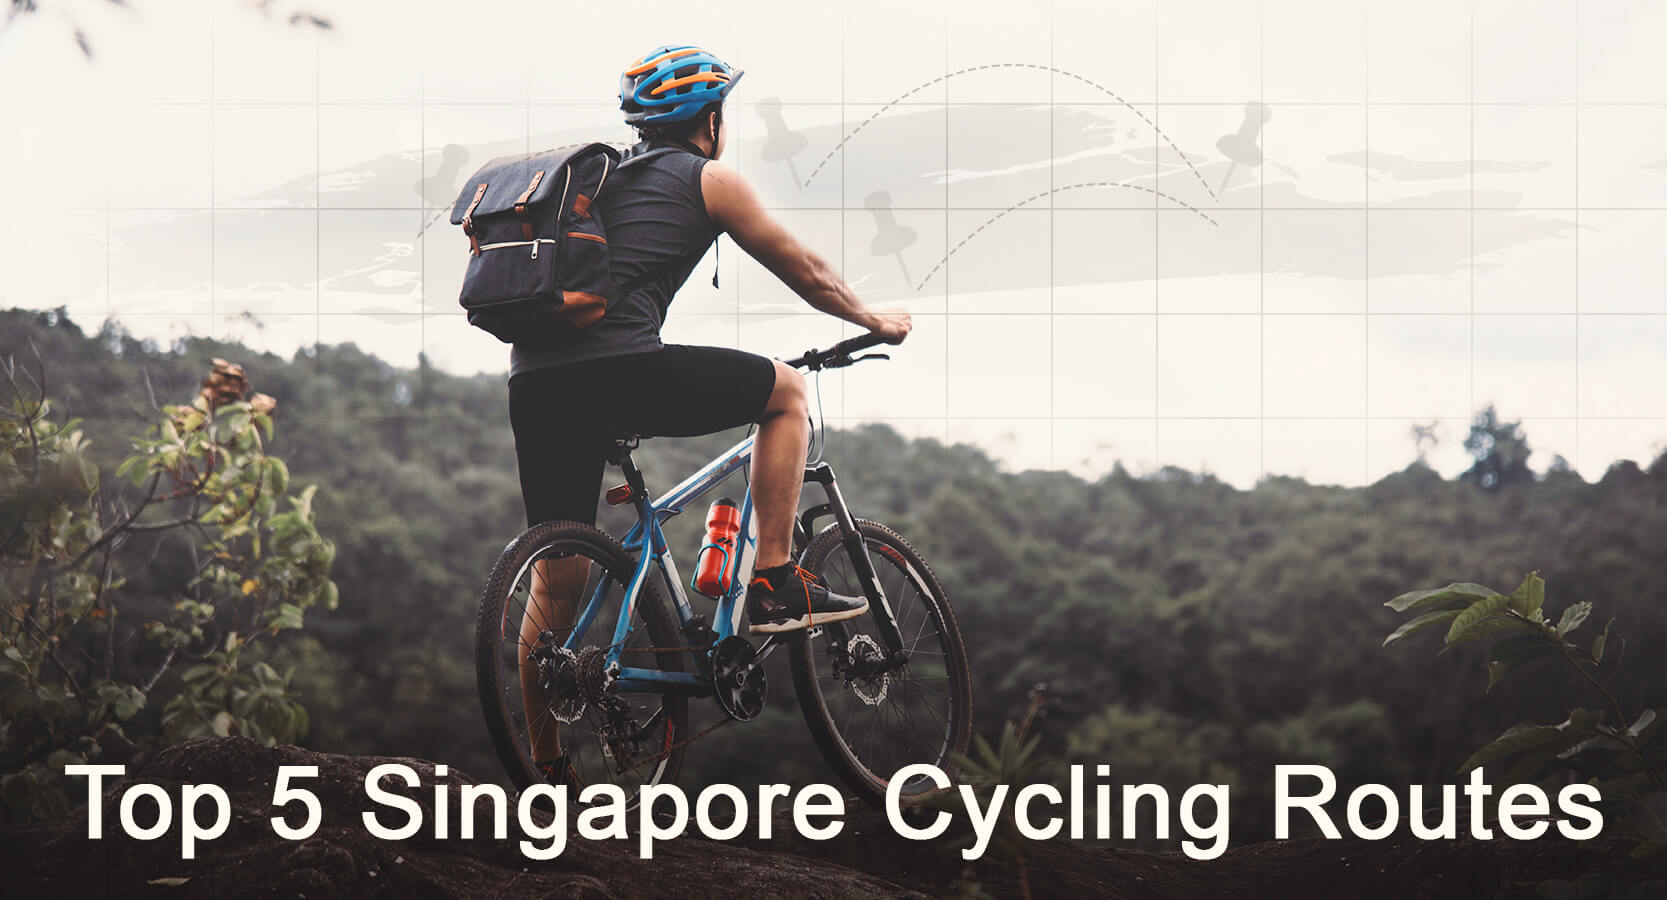 Singapore Cycling Routes